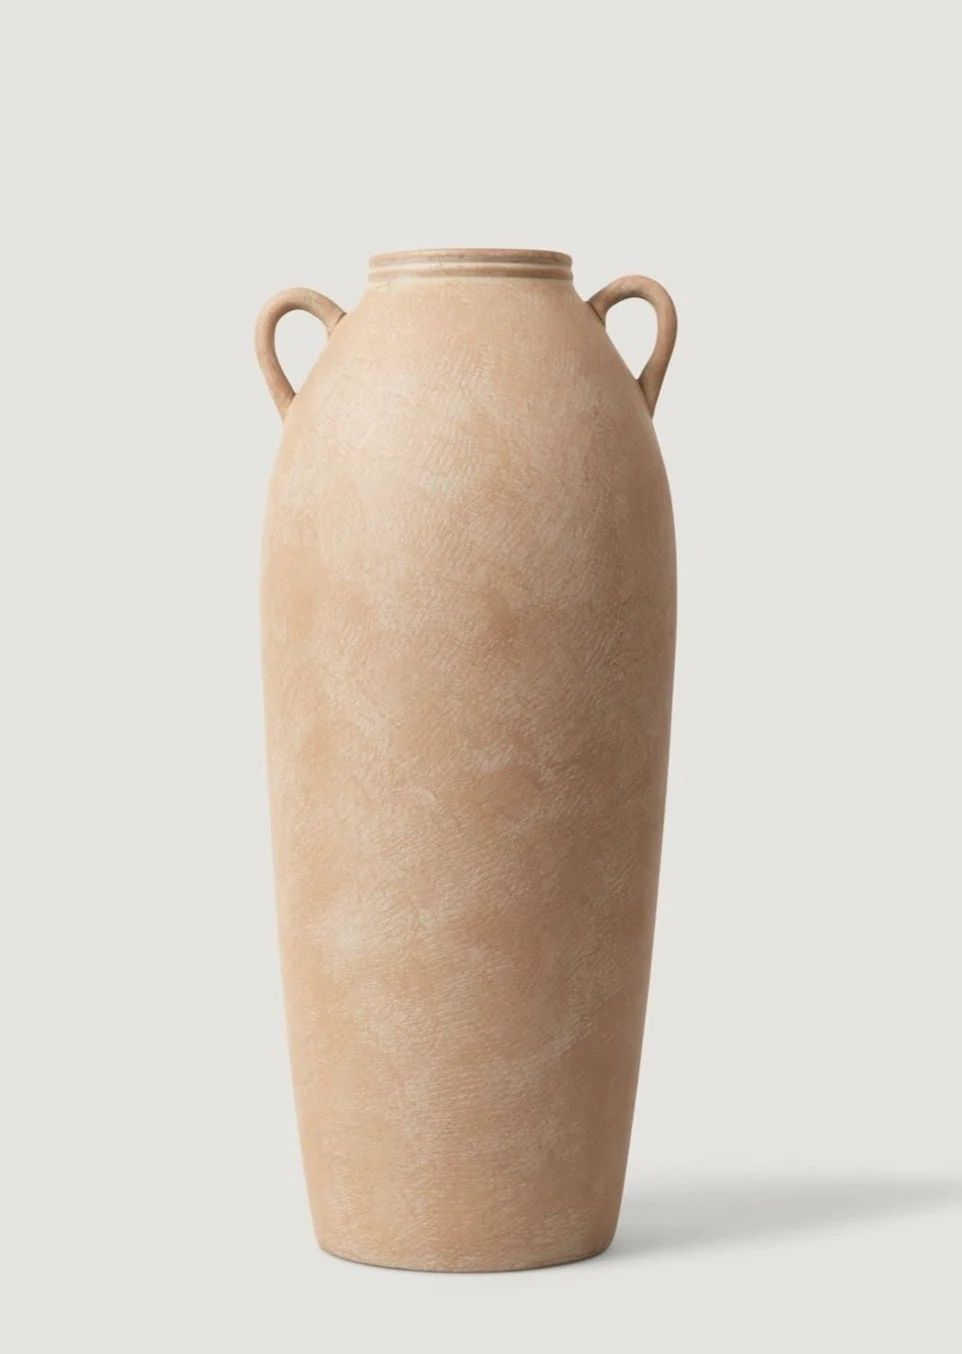 Tall Terra Cotta Vase with Handles - 20" | Afloral